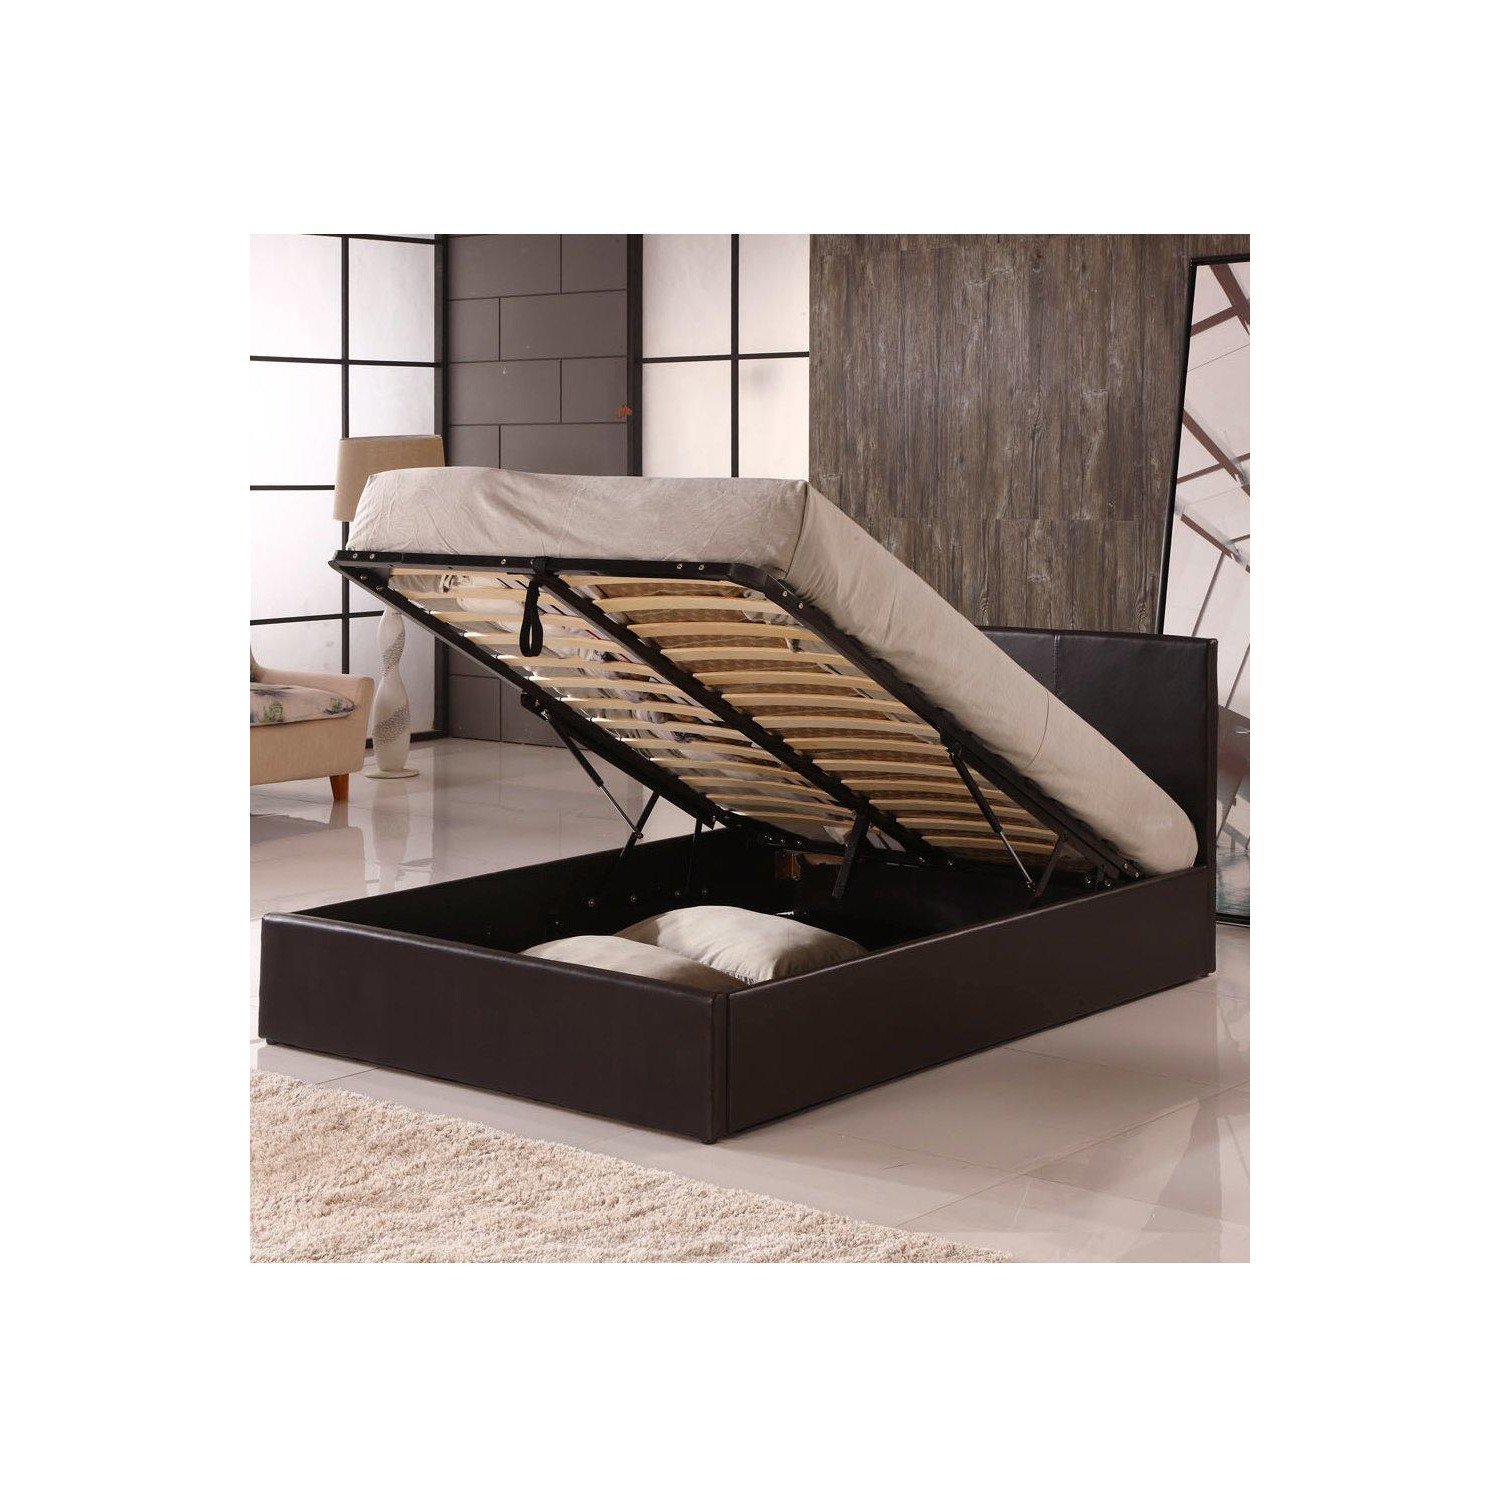 Ottoman Double Storage Bed Faux Leather with Gas Lift Up Base - image 1